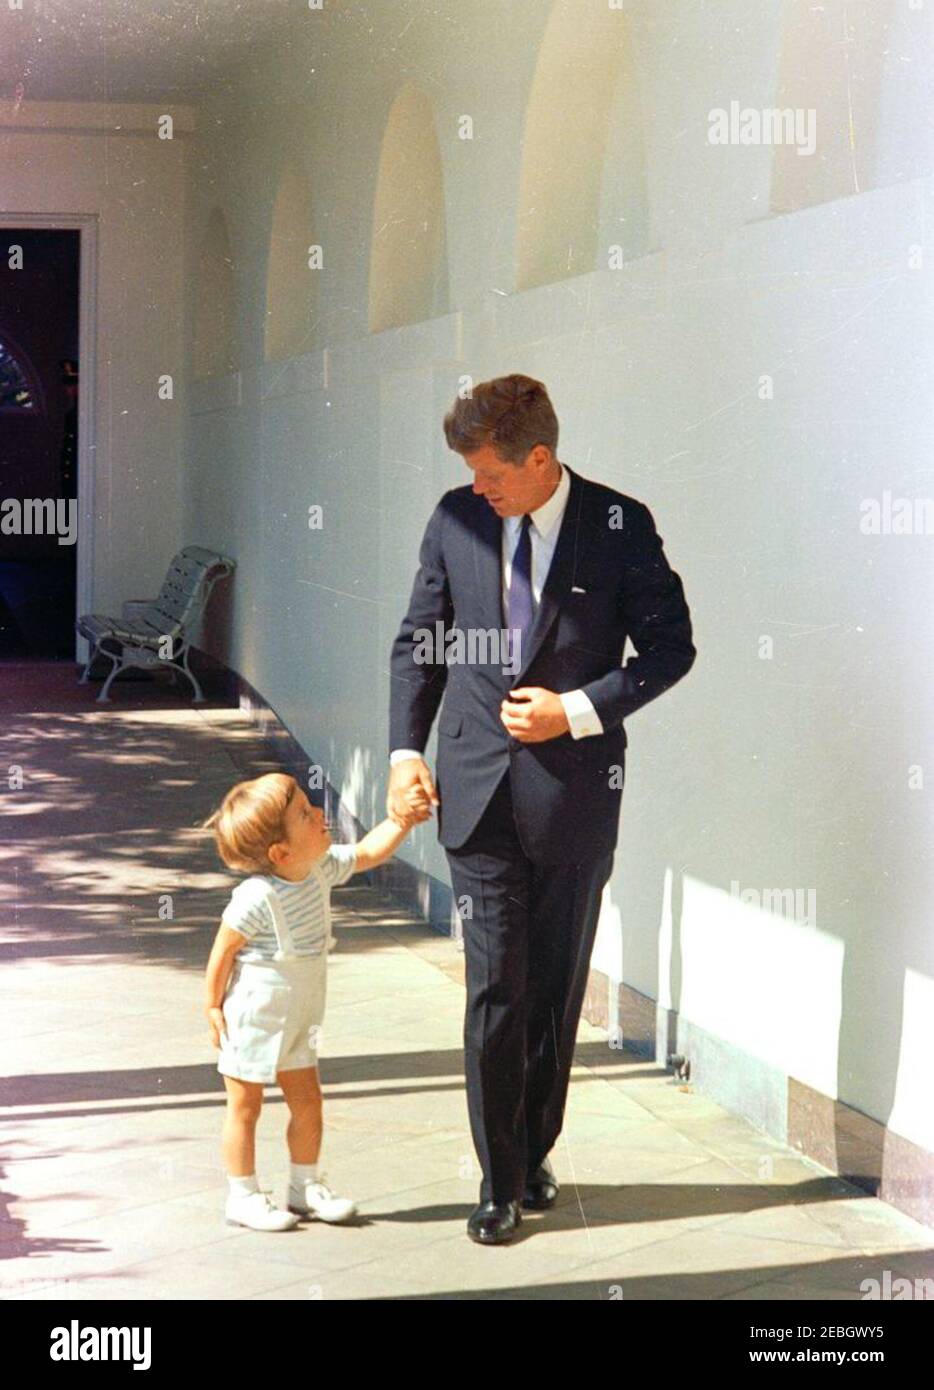 President Kennedy with John F. Kennedy, Jr. (JFK, Jr.). President John F. Kennedy walks with his son, John F. Kennedy, Jr., along the West Wing Colonnade of the White House, Washington, D.C. Stock Photo